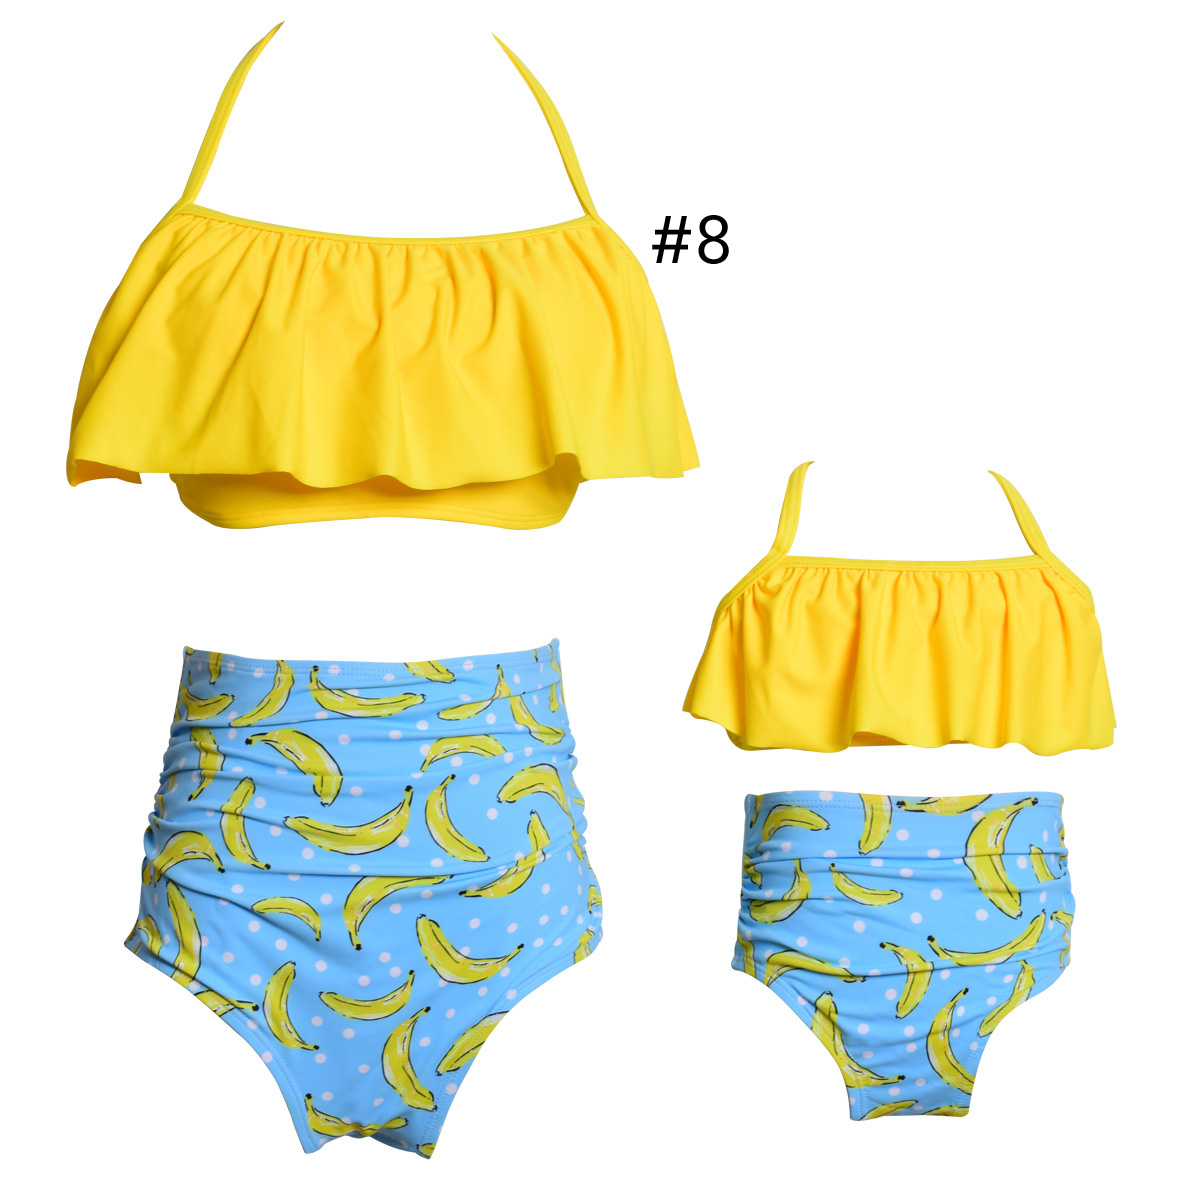 Parent-child swimwear mother and daughter swimsuit printed high waisted bikini with ruffled edges